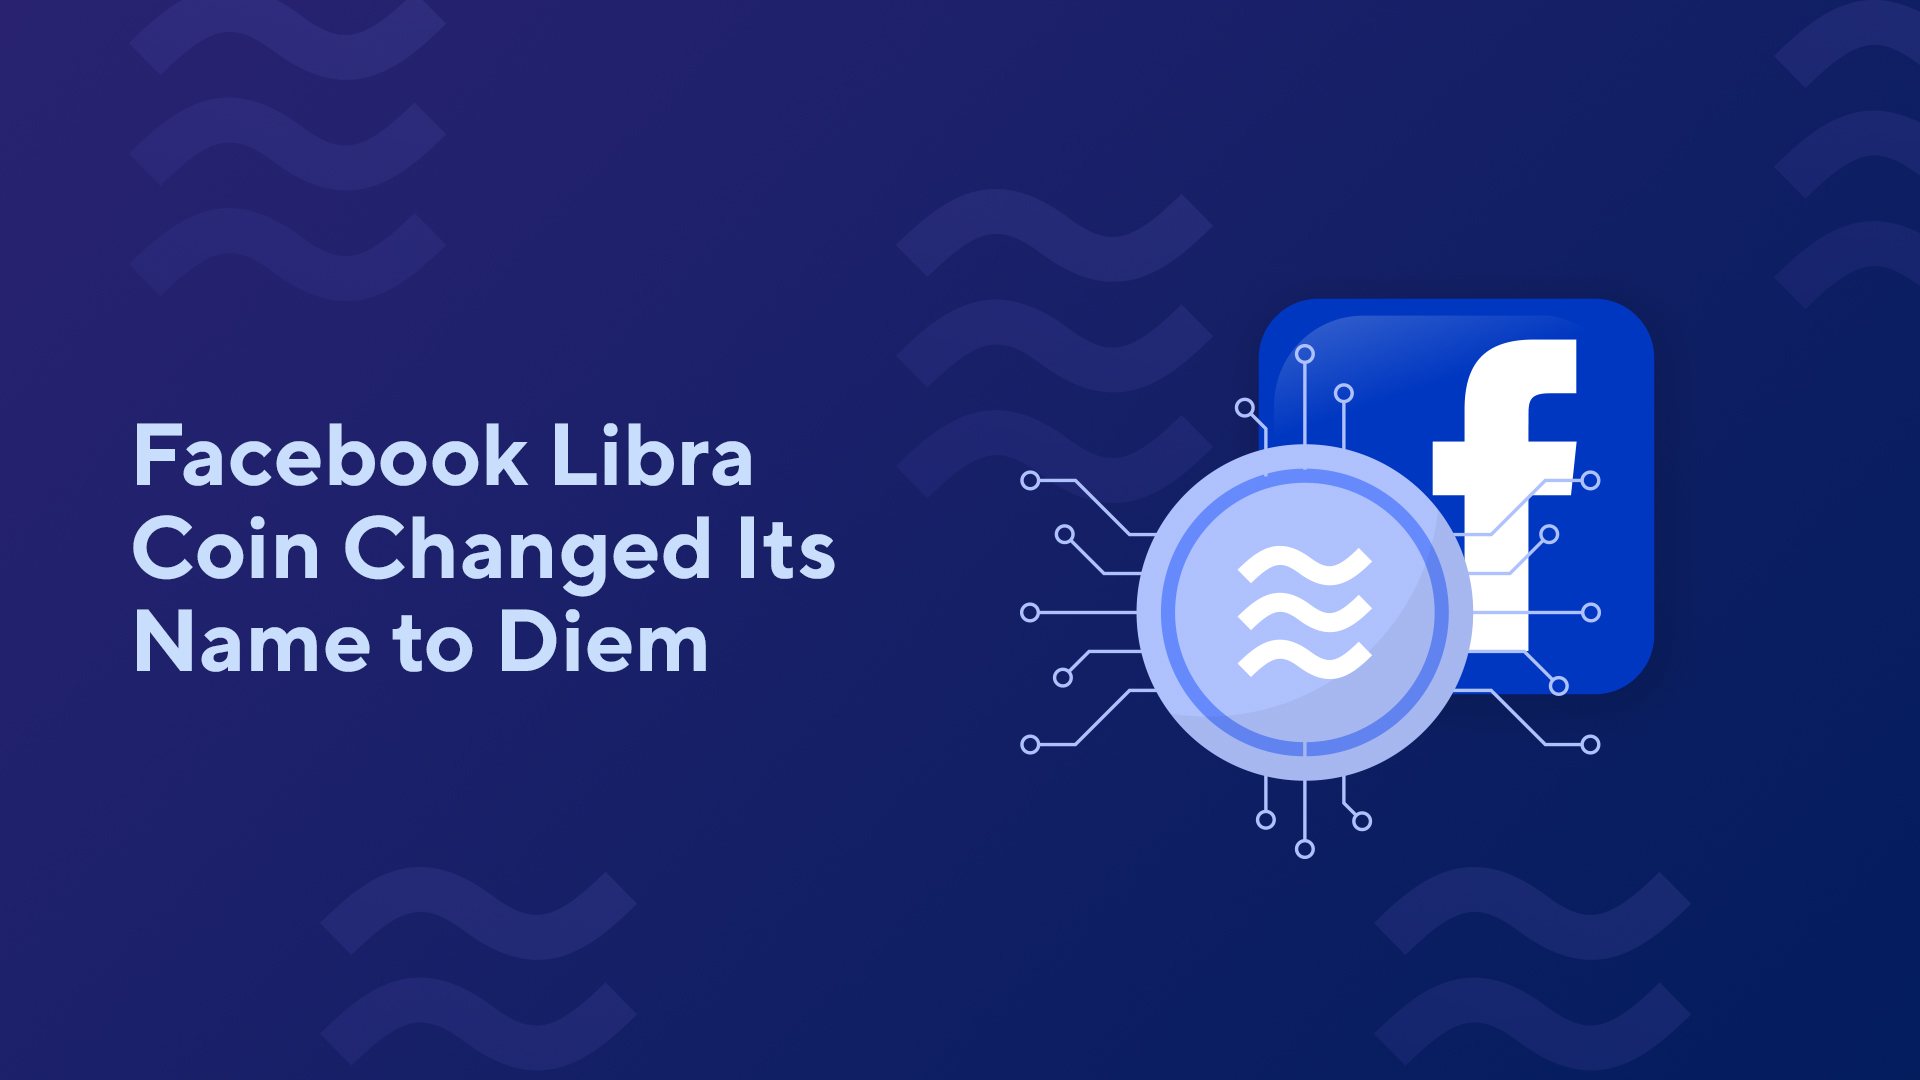 Facebook Libra Coin Changed Its Name to Diem